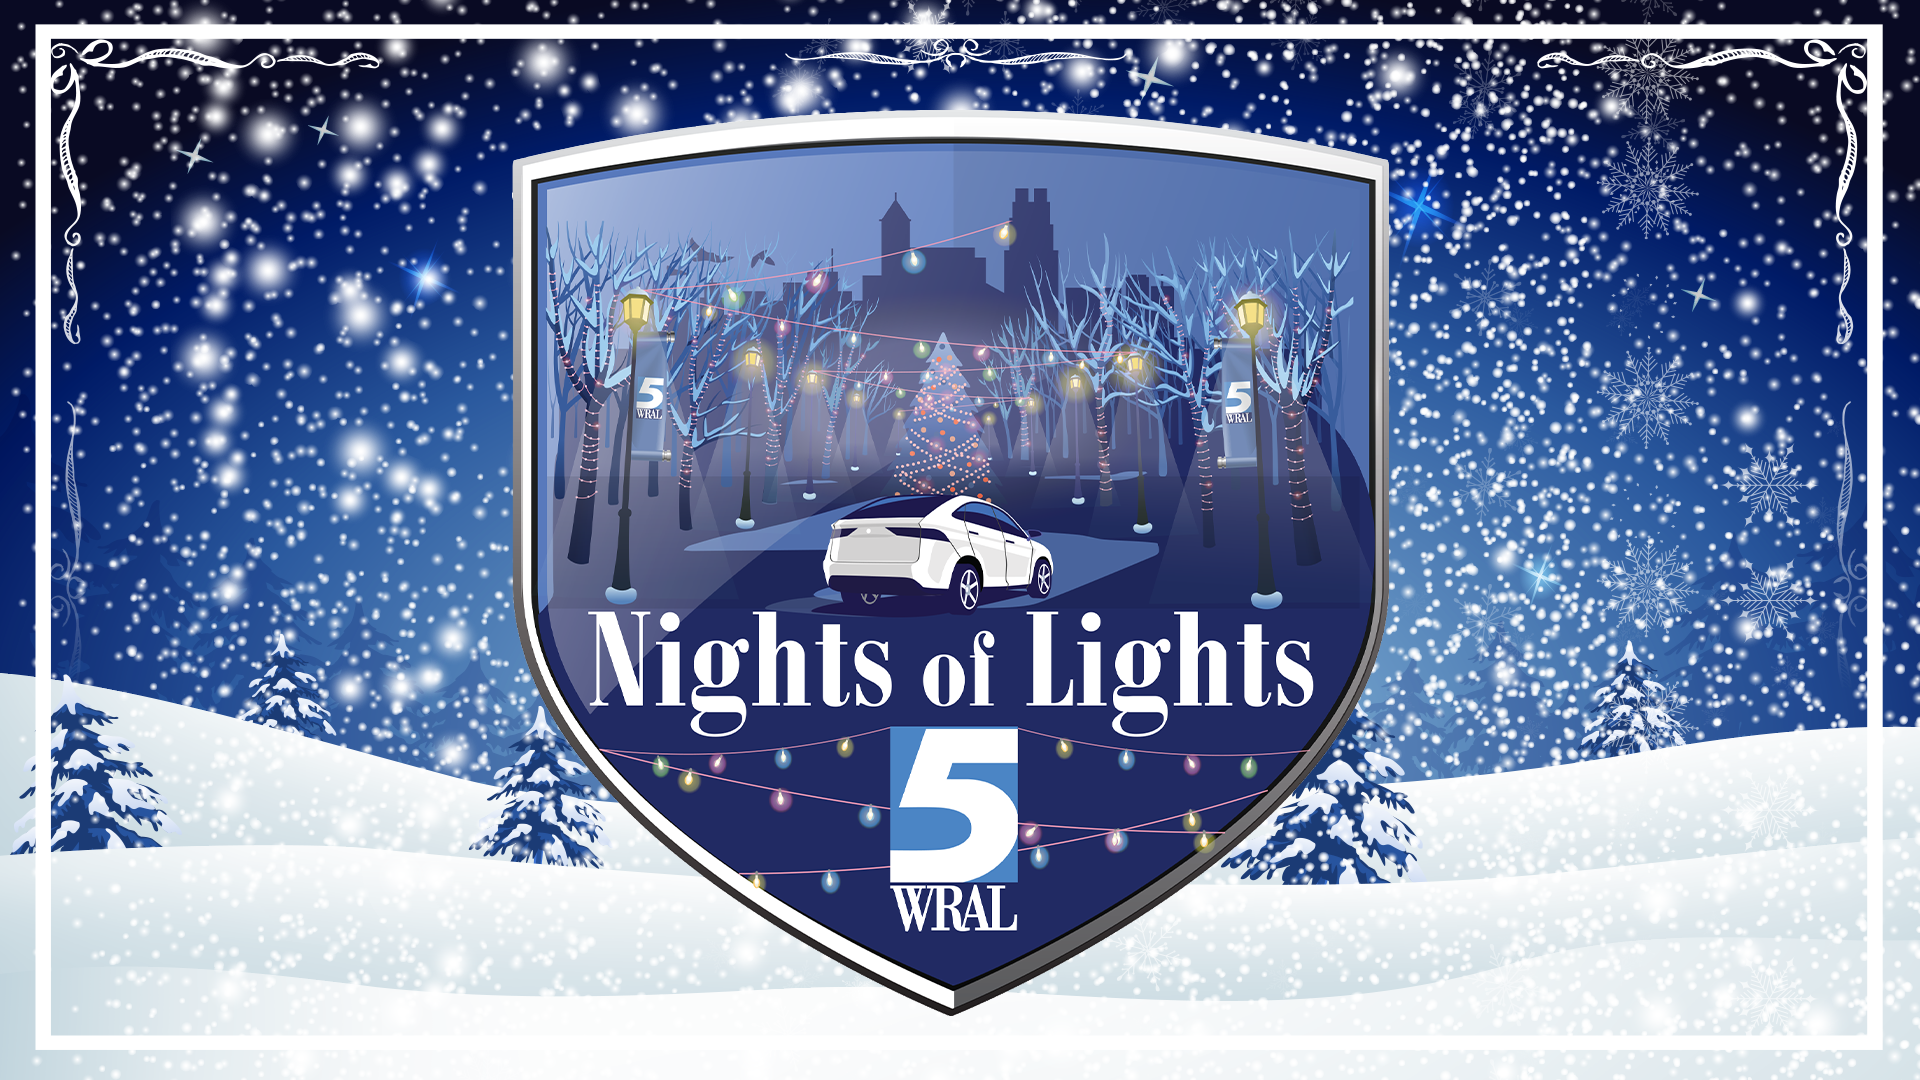 WRAL Nights of Lights Web Graphic